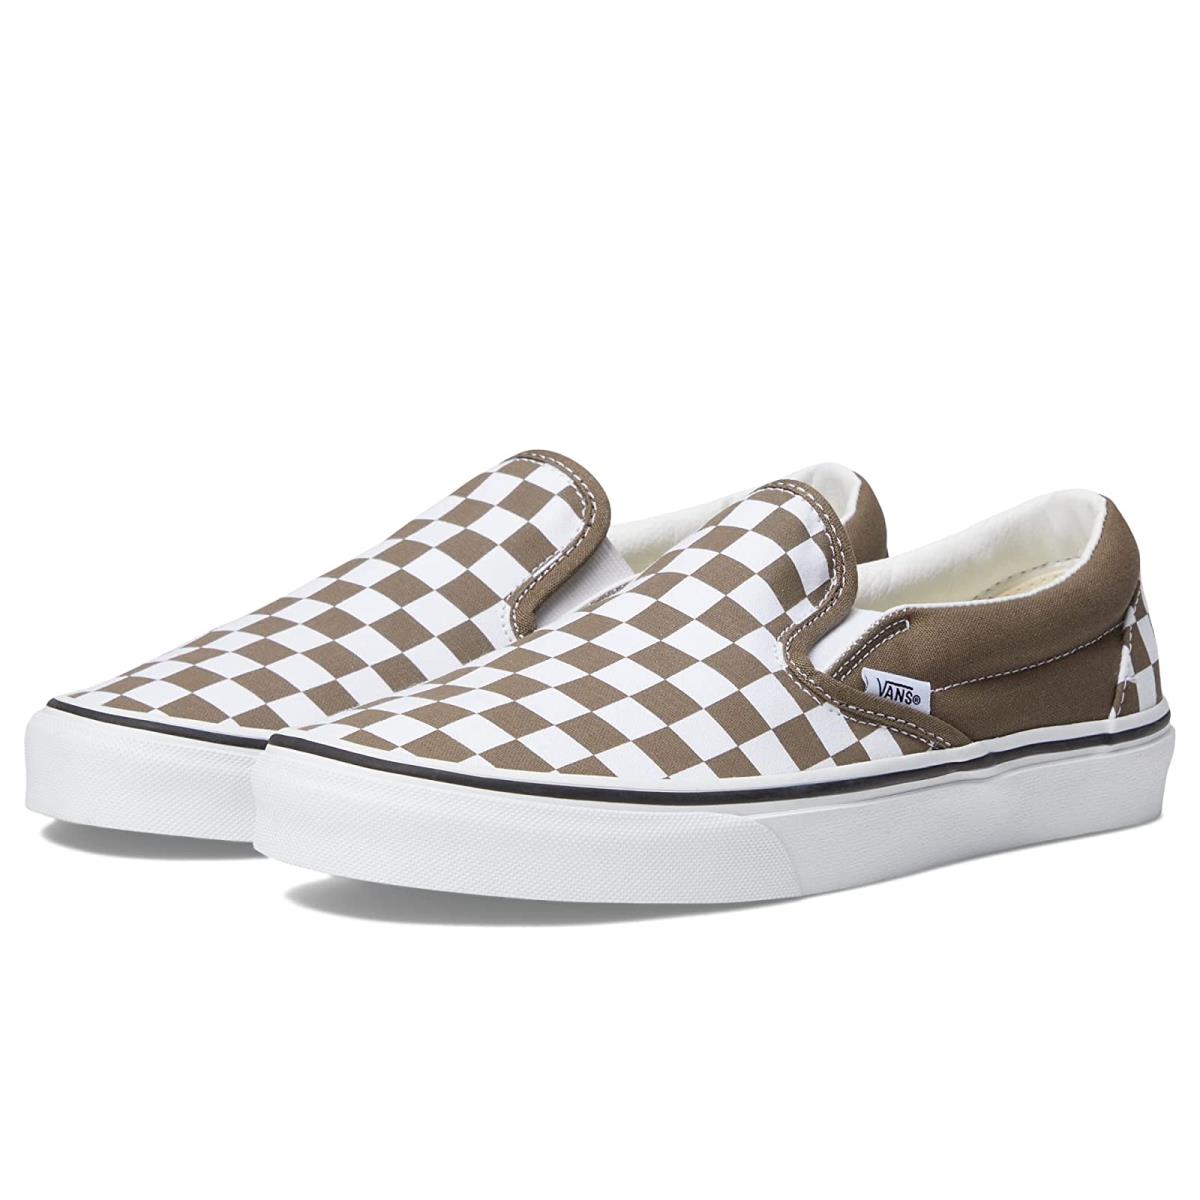 Unisex Sneakers Athletic Shoes Vans Classic Slip-on Color Theory Checkerboard Walnut